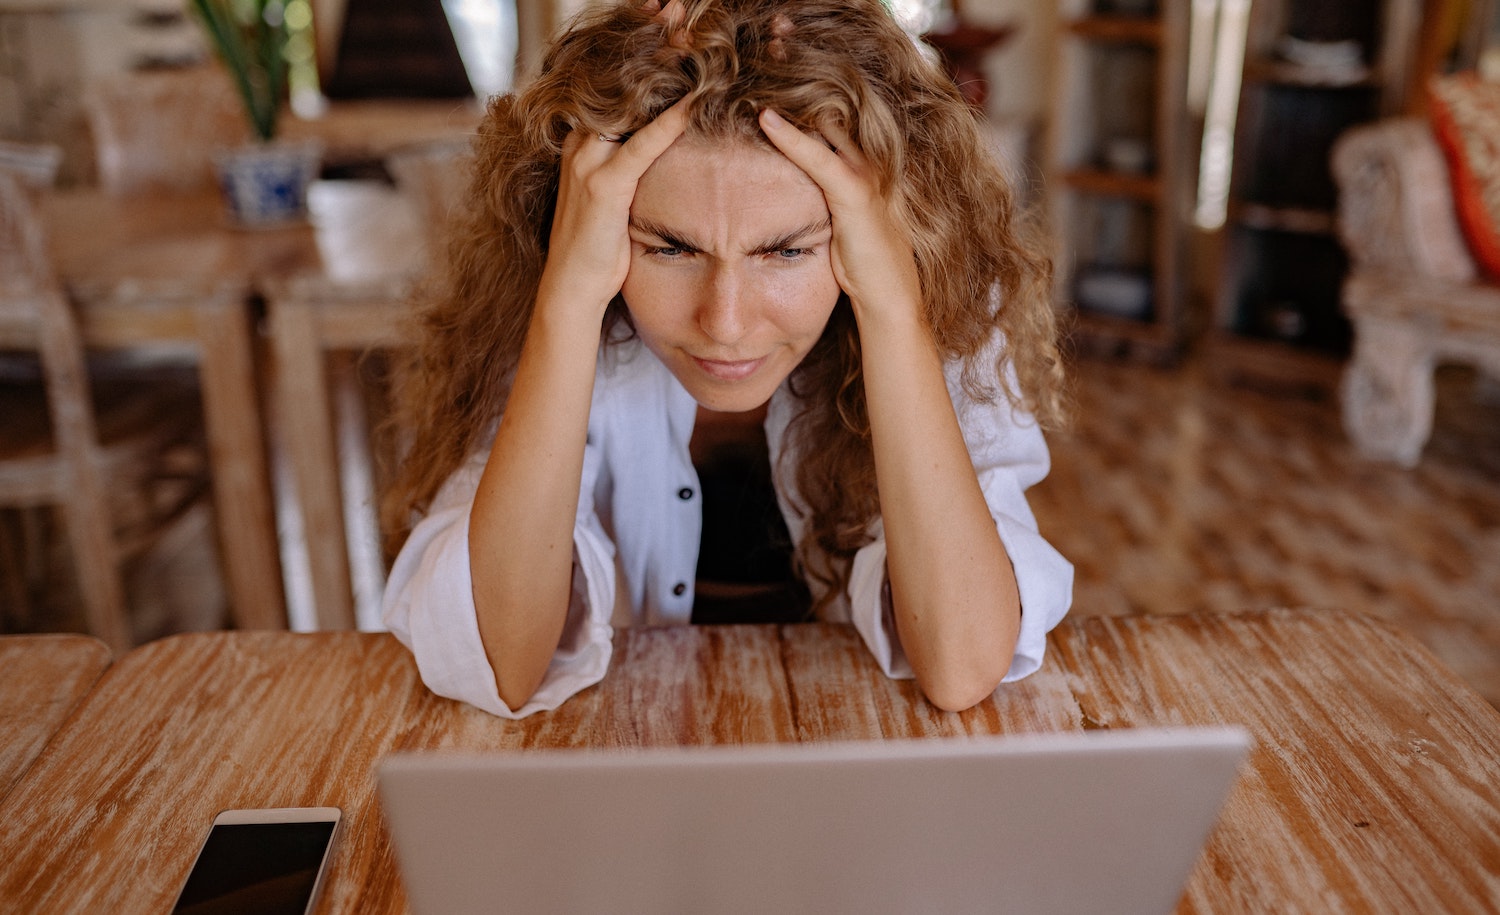 A woman experiencing a flood of frustration, stress and worry while working at her computer in her home office